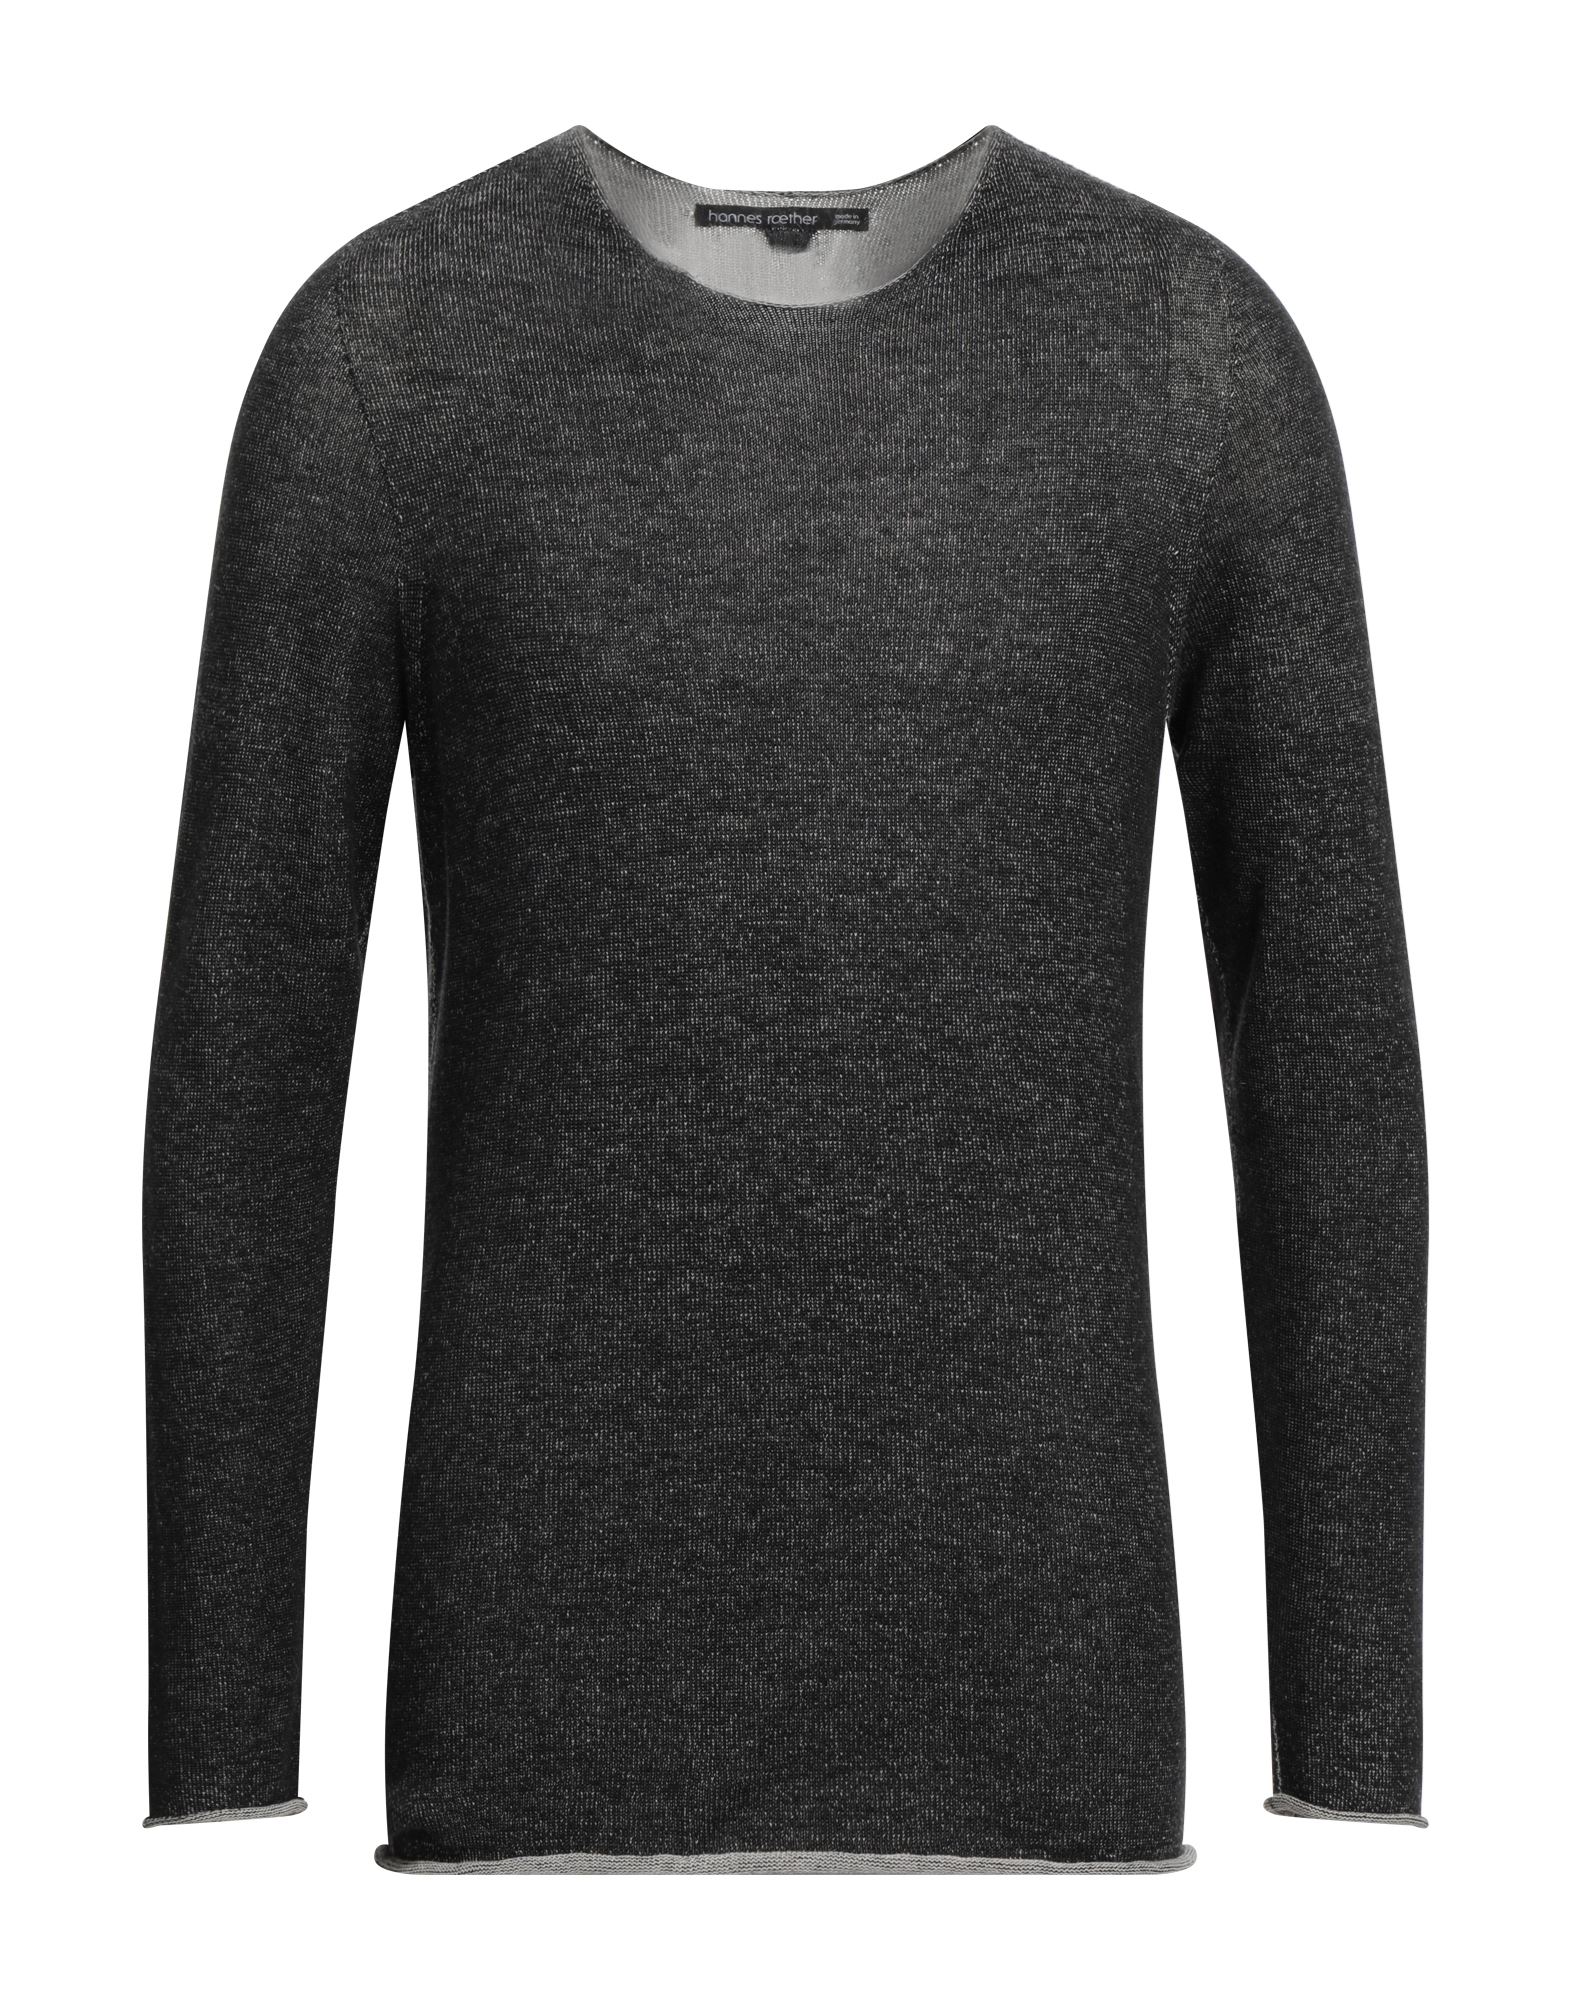 Hannes Roether Sweaters In Black